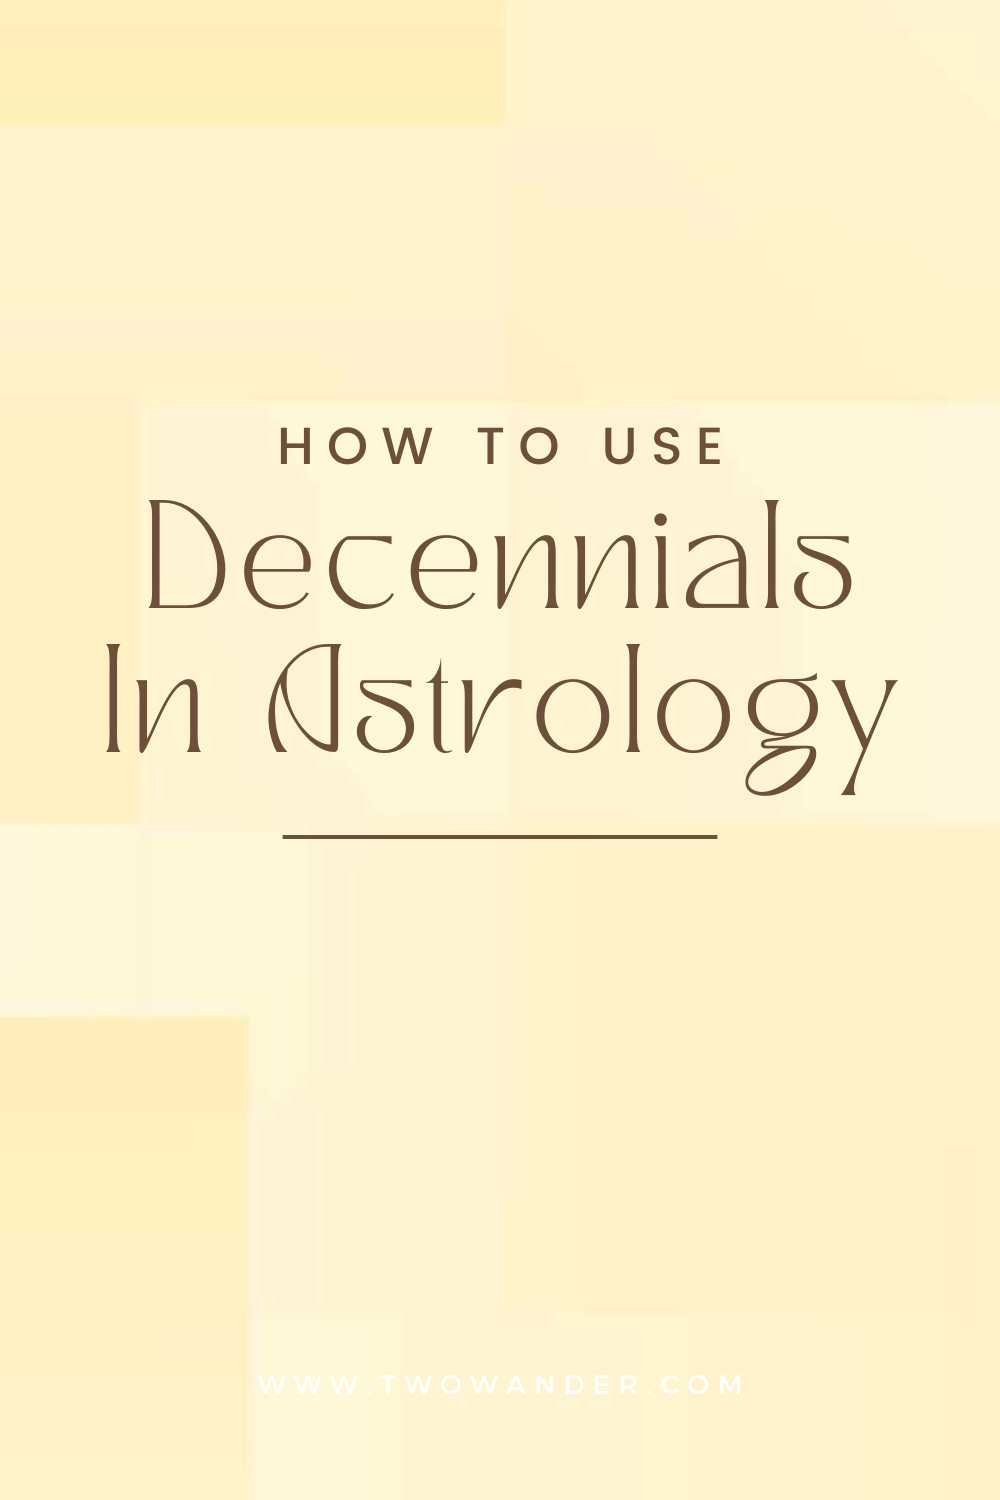 two-wander-how-to-use-decennials-in-astrology